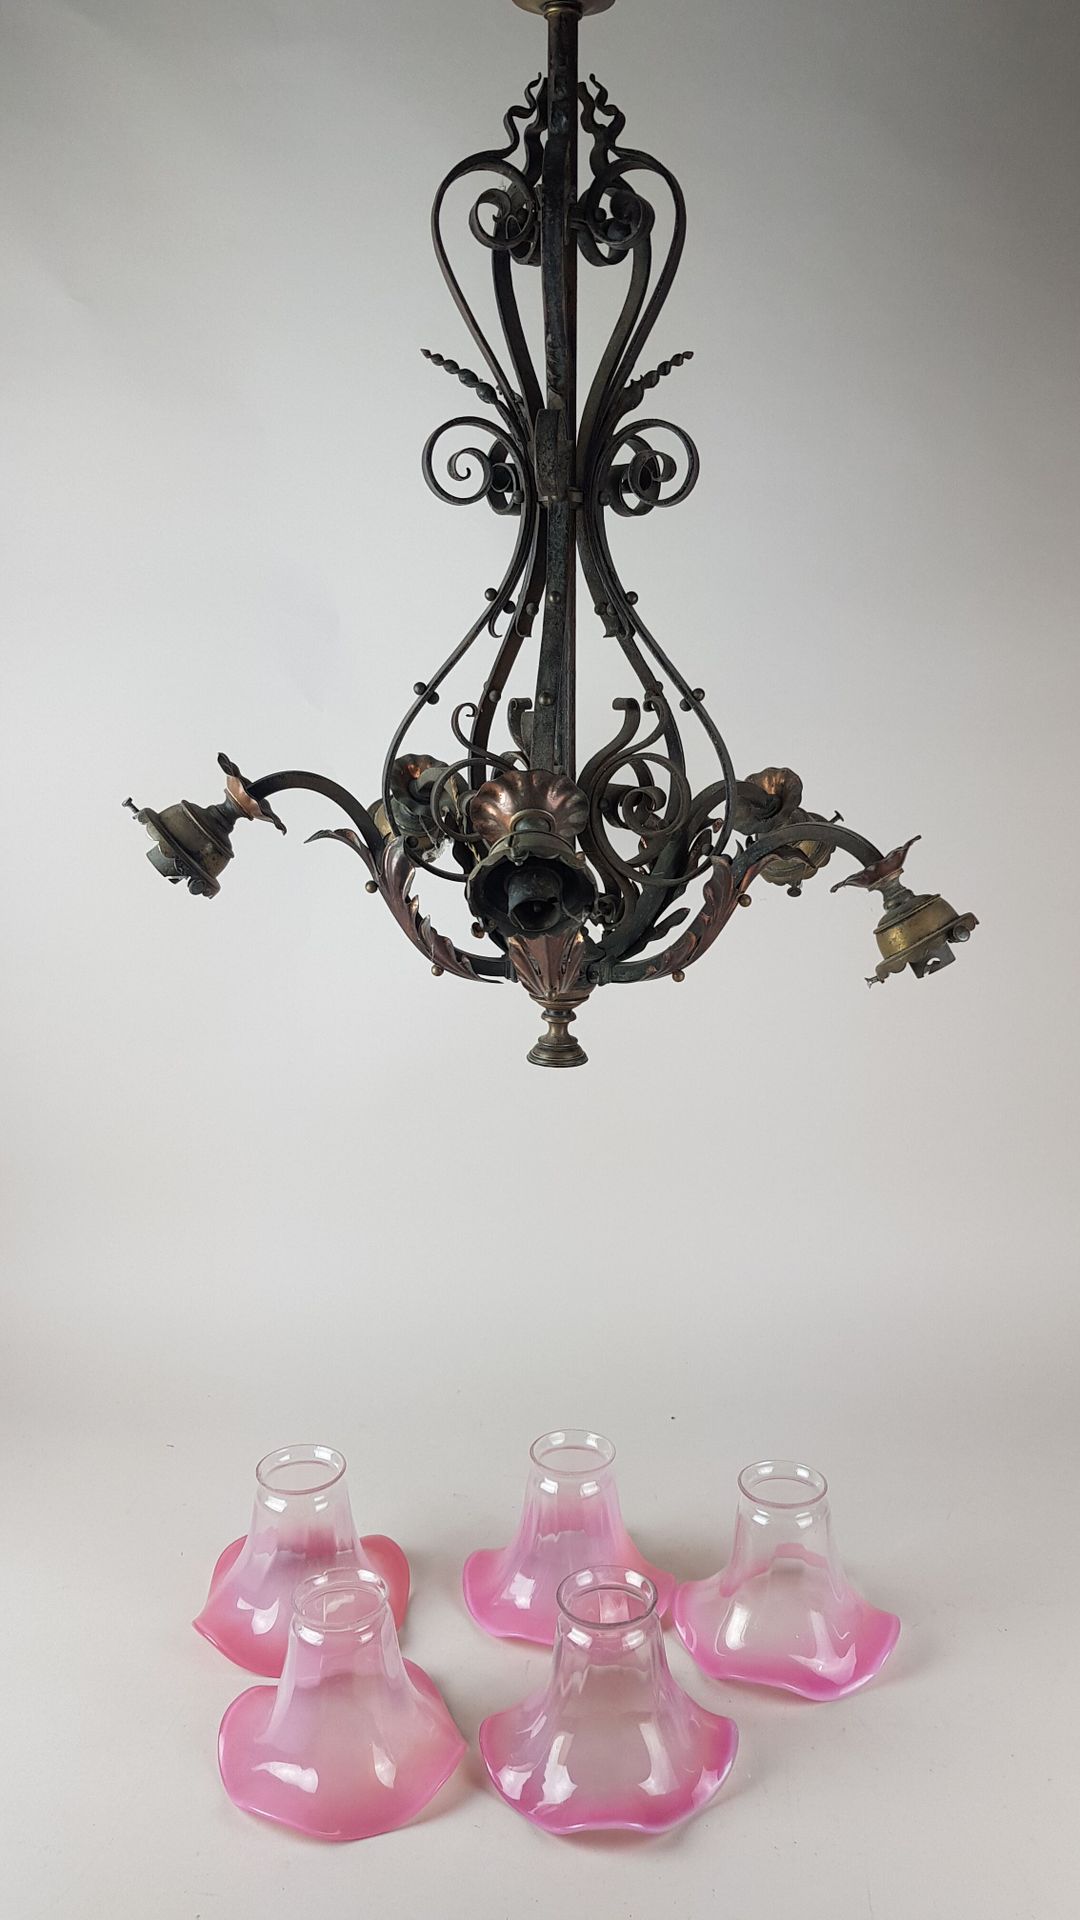 Null Iron and brass chandelier with 5 pink glass tulips. H 70 cm - wear and tear